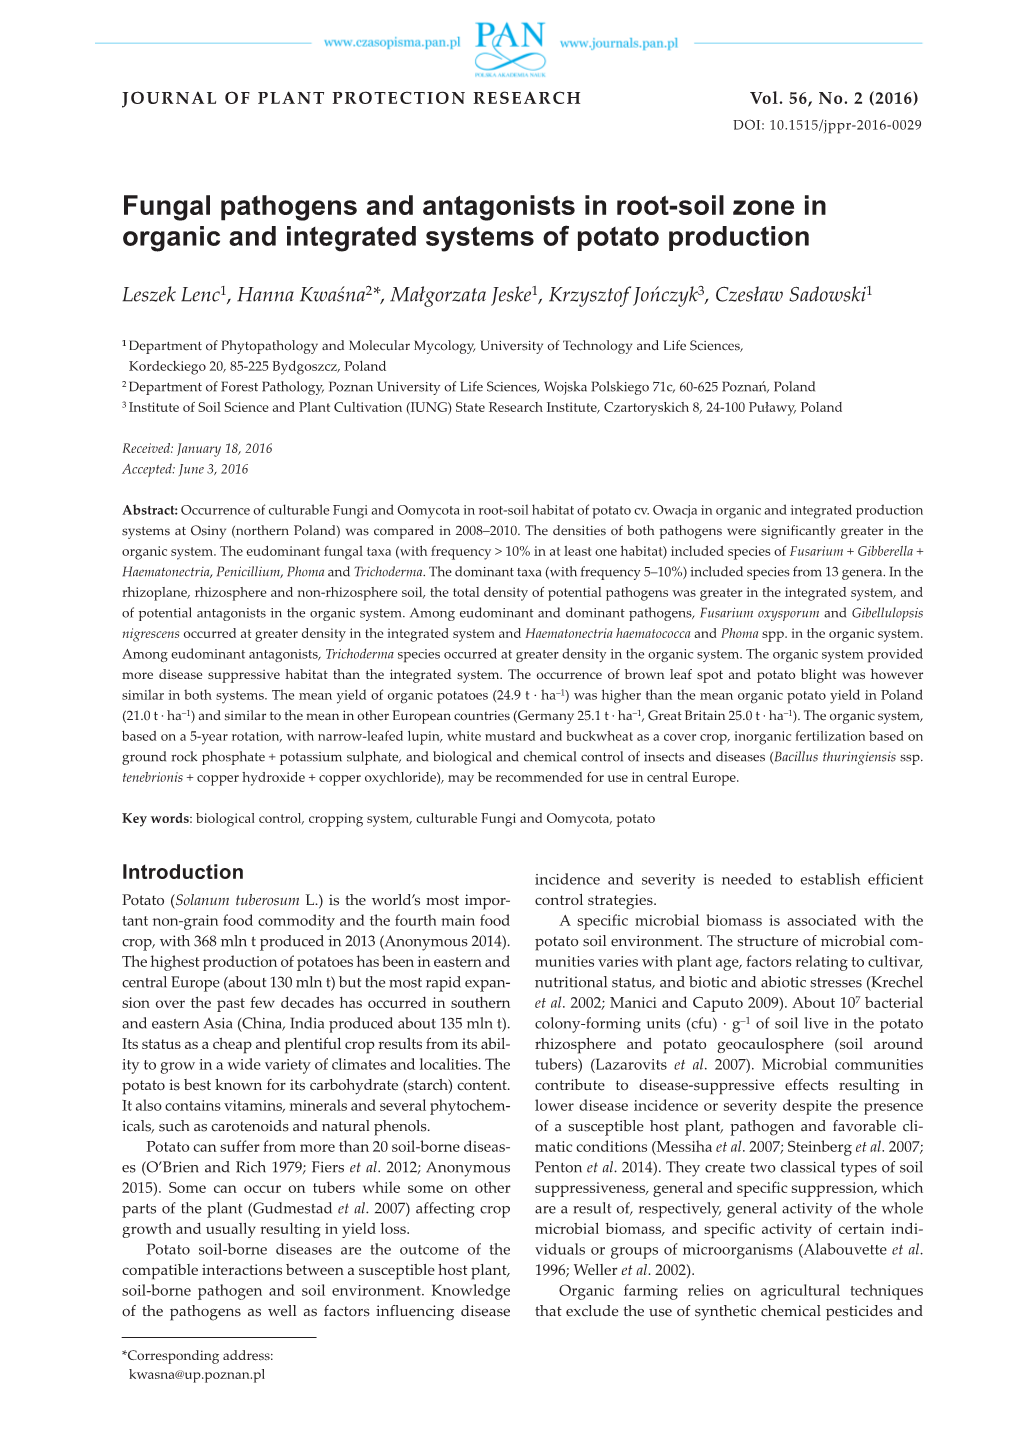 Fungal Pathogens and Antagonists in Root-Soil Zone in Organic and Integrated Systems of Potato Production